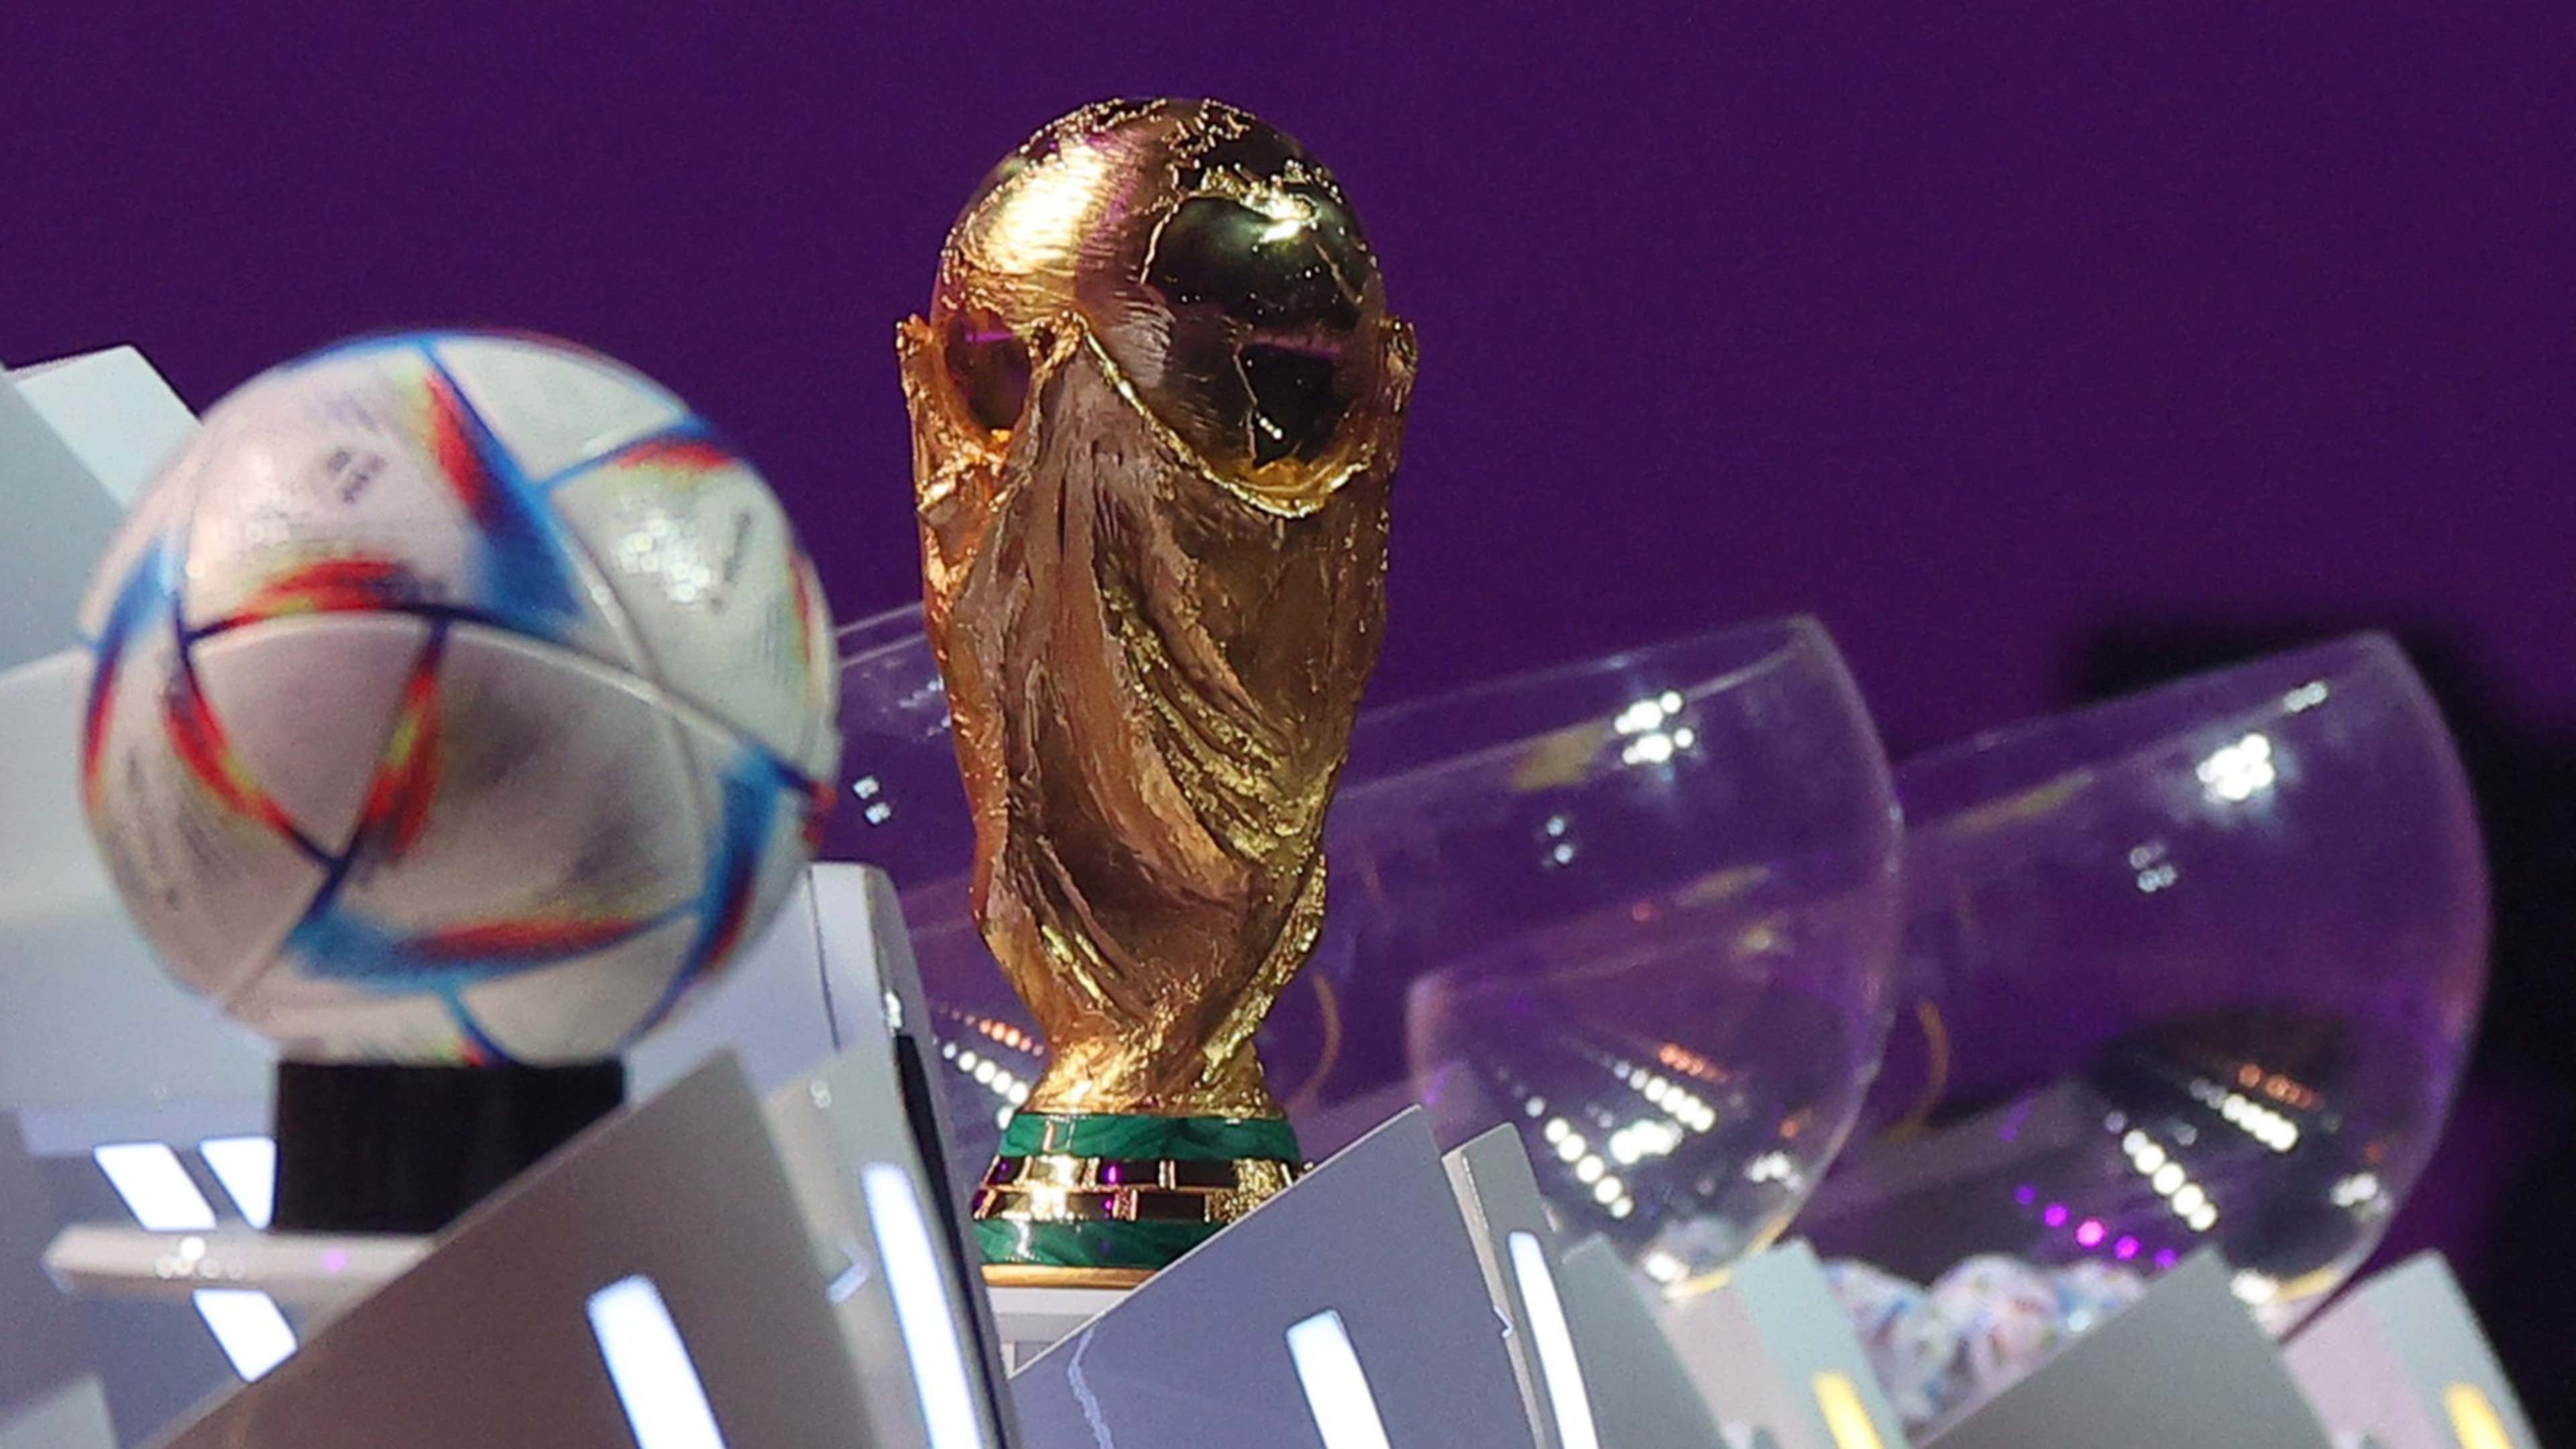 World Cup 2022 group stage draw: When, how to watch and stream